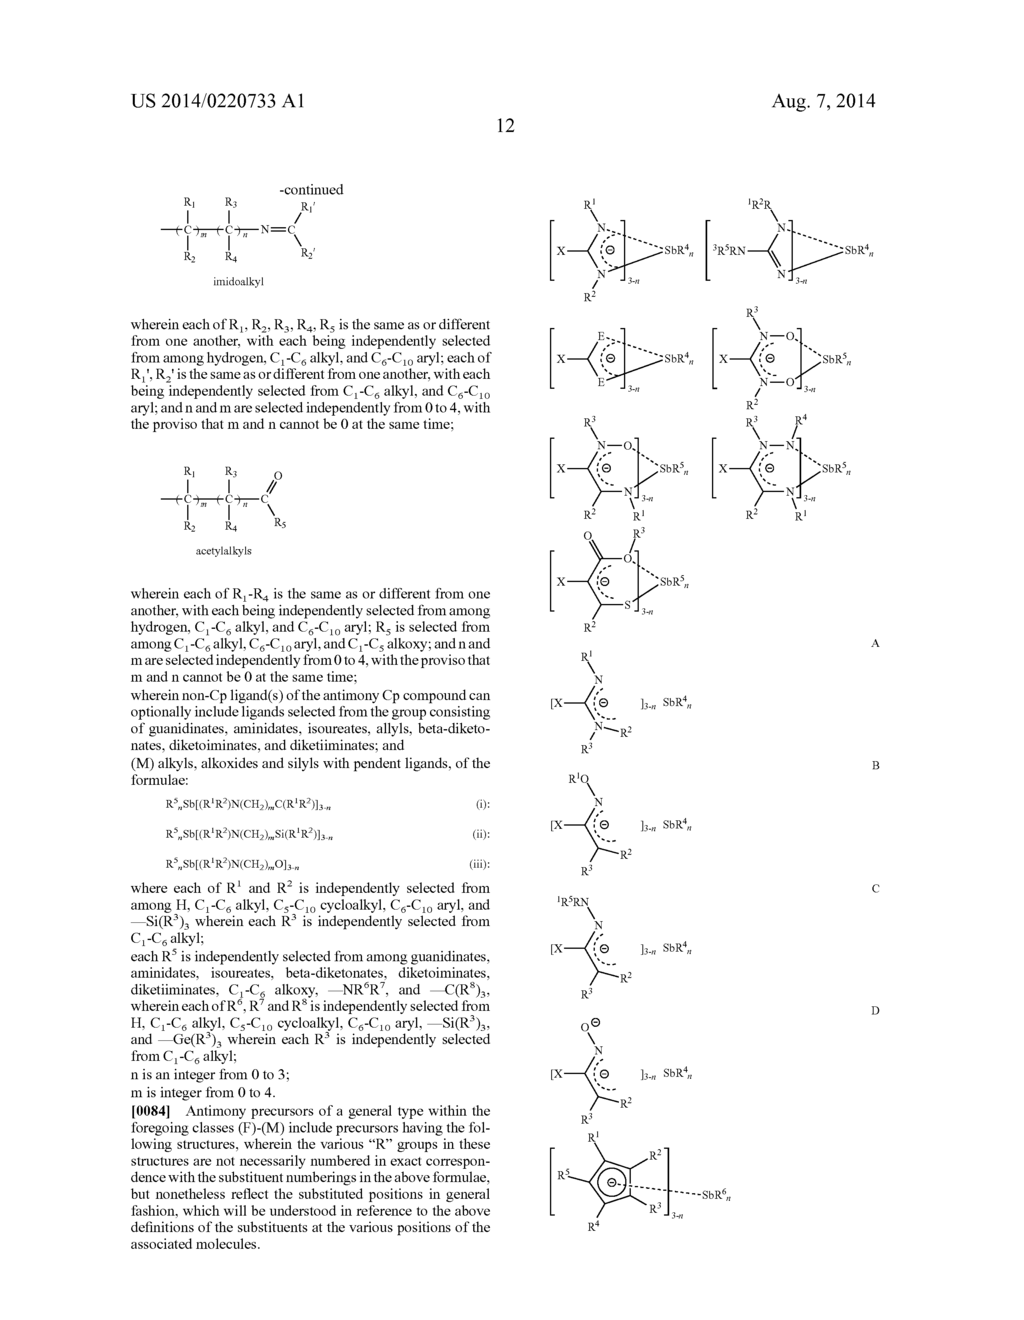 ANTIMONY AND GERMANIUM COMPLEXES USEFUL FOR CVD/ALD OF METAL THIN FILMS - diagram, schematic, and image 18